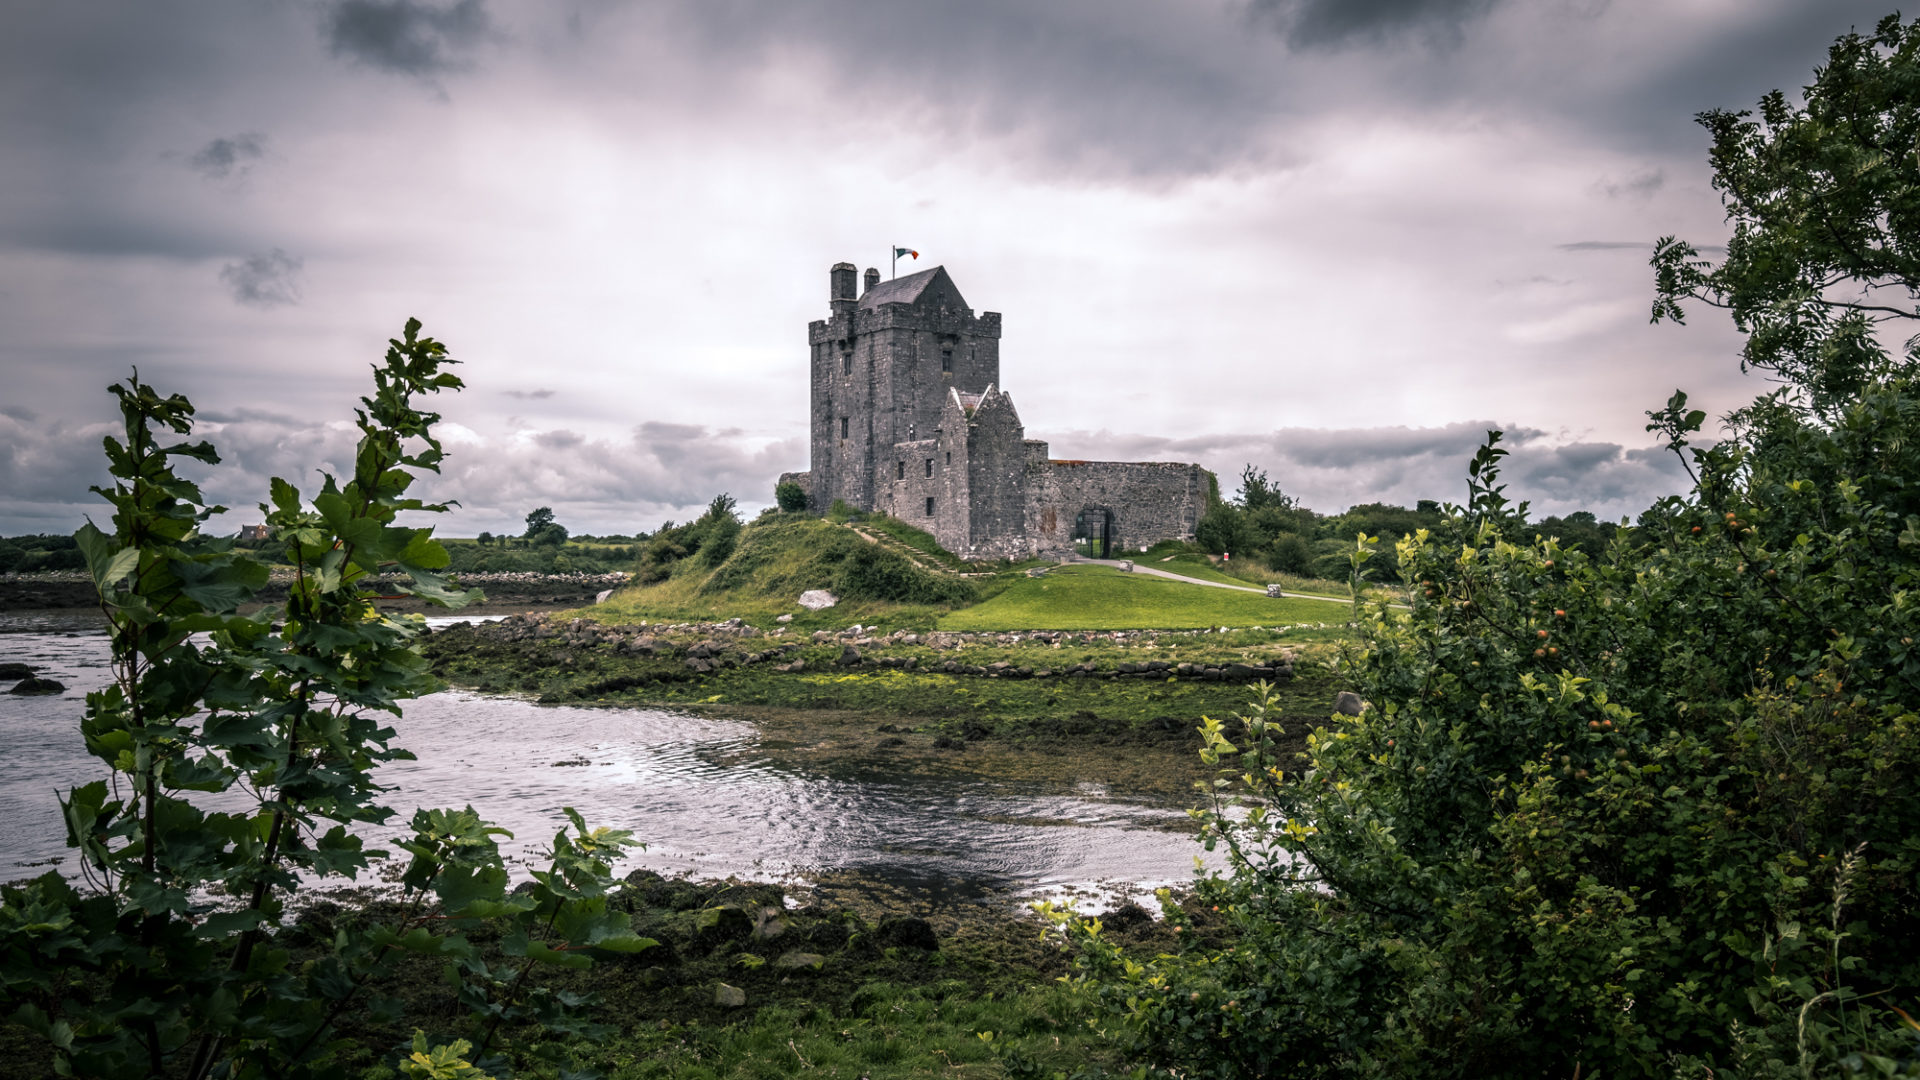 Dunguaire Castle - Kinvara, Ireland – Giuseppe Milo / flickr.com / Lizenz: CC BY 2.0 Check out my gallery at http://www.pixael.com/en/pictures if you want to see more pictures.  You can follow me on https://www.facebook.com/giuseppemilophoto https://twitter.com/pixael_com https://instagram.com/pixael/